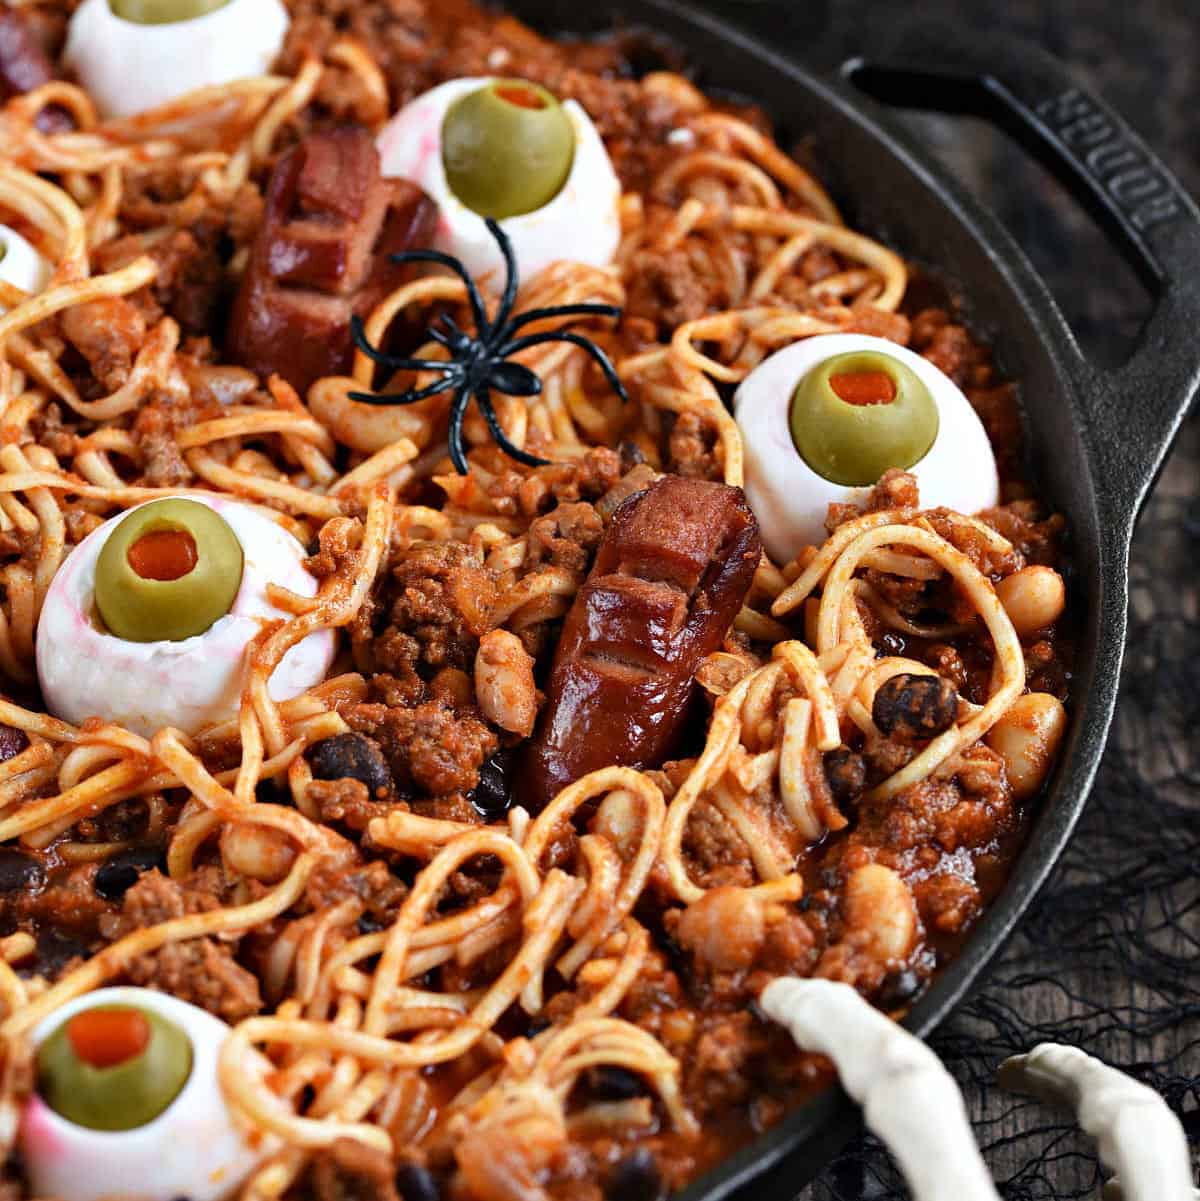 Spooky Halloween Chili with noodles, beans, egg eyes, and hot dog fingers and toes.